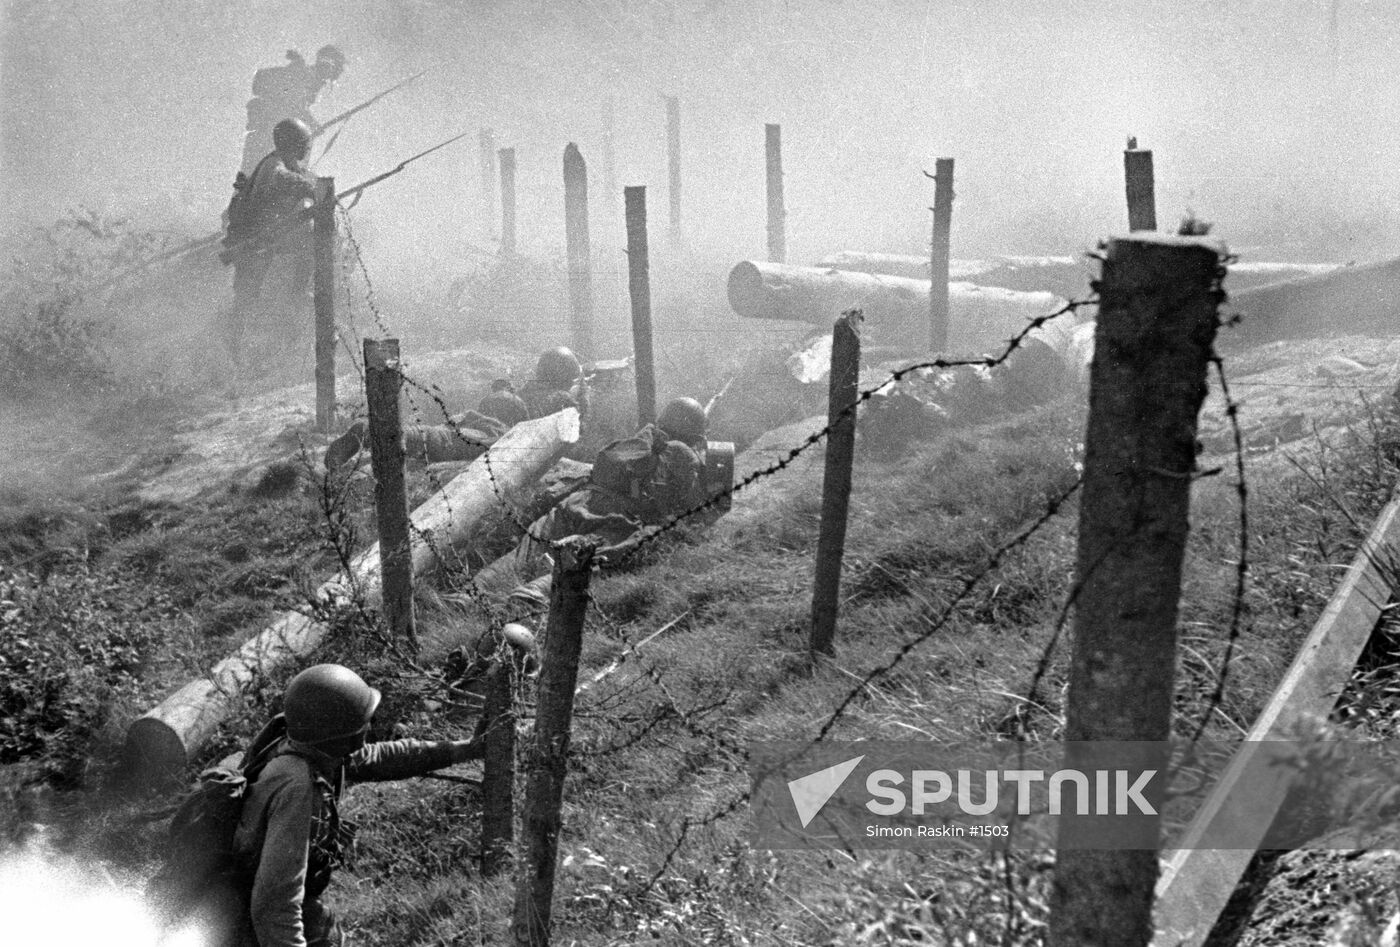 WWII BATTLE BARBED WIRE FENCE